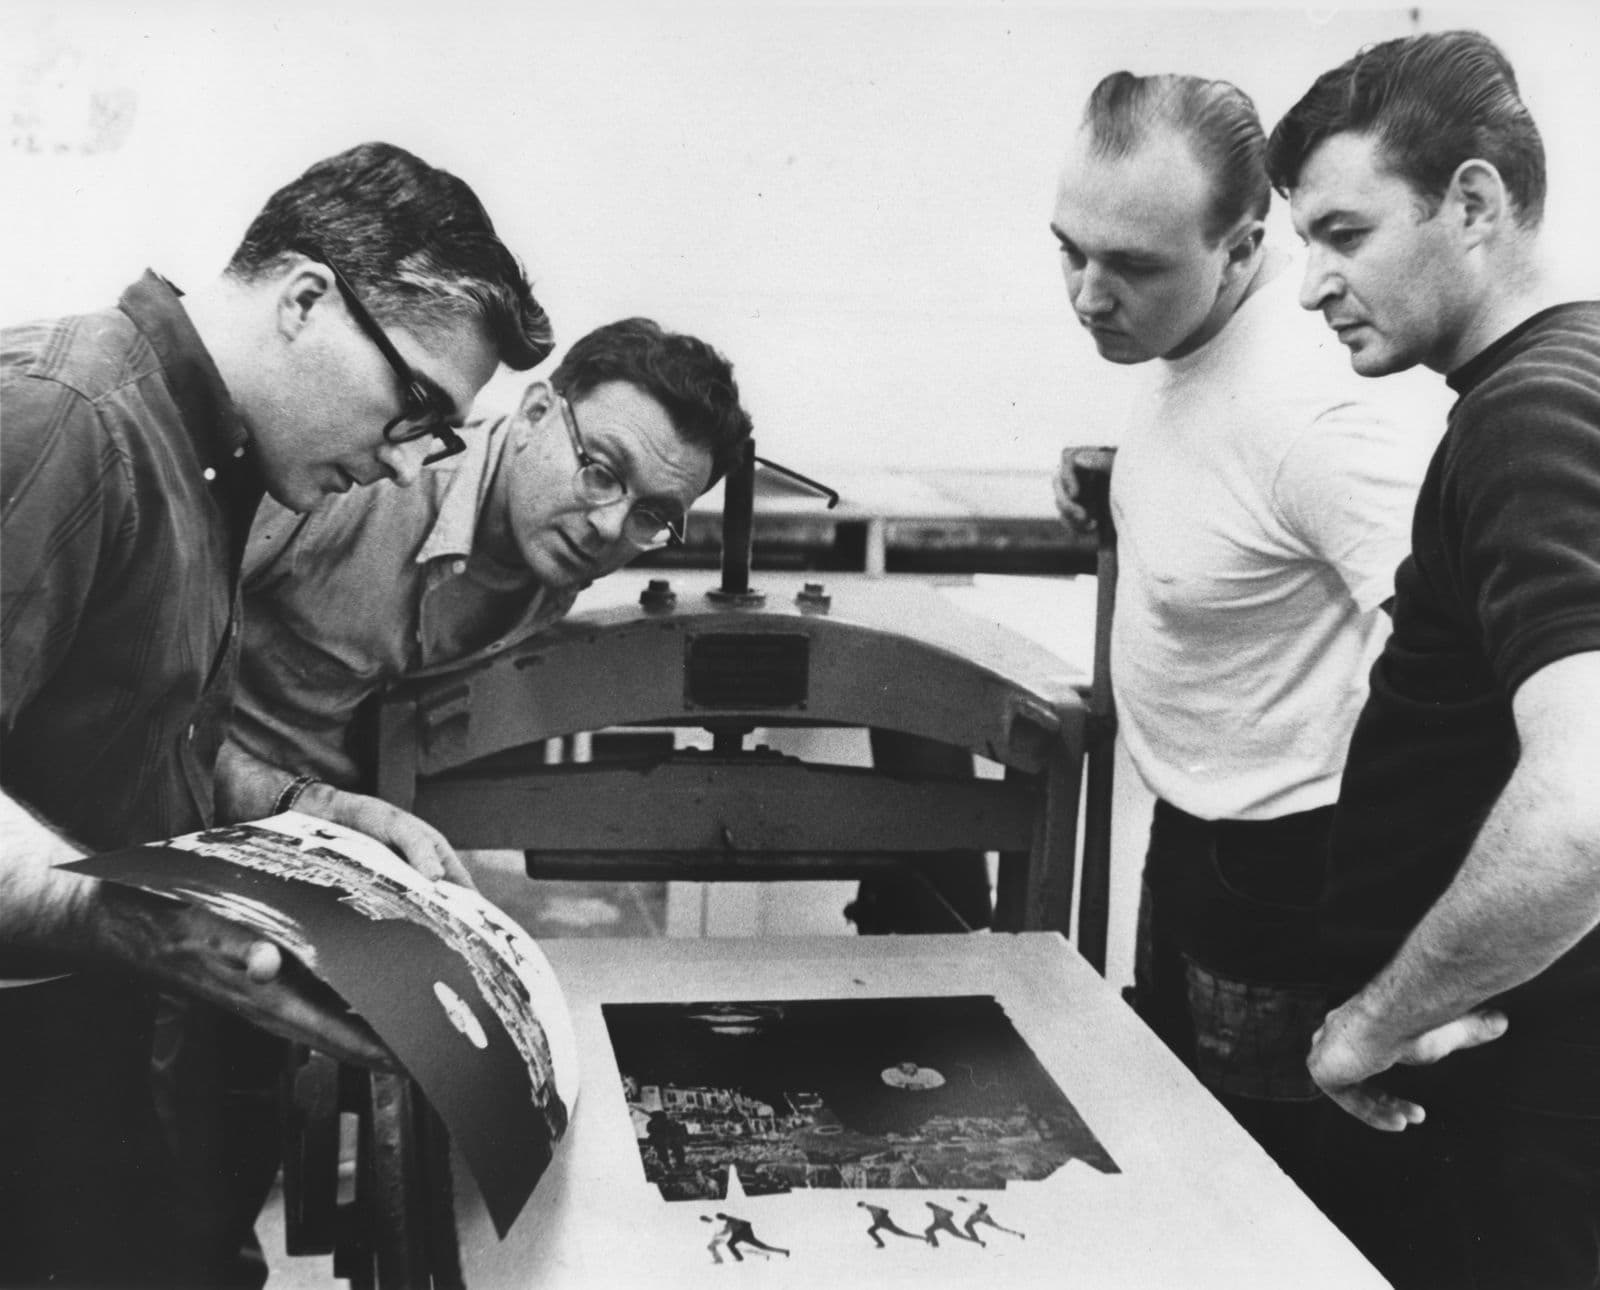 Four men looking at paper with freshly printed artwork on it